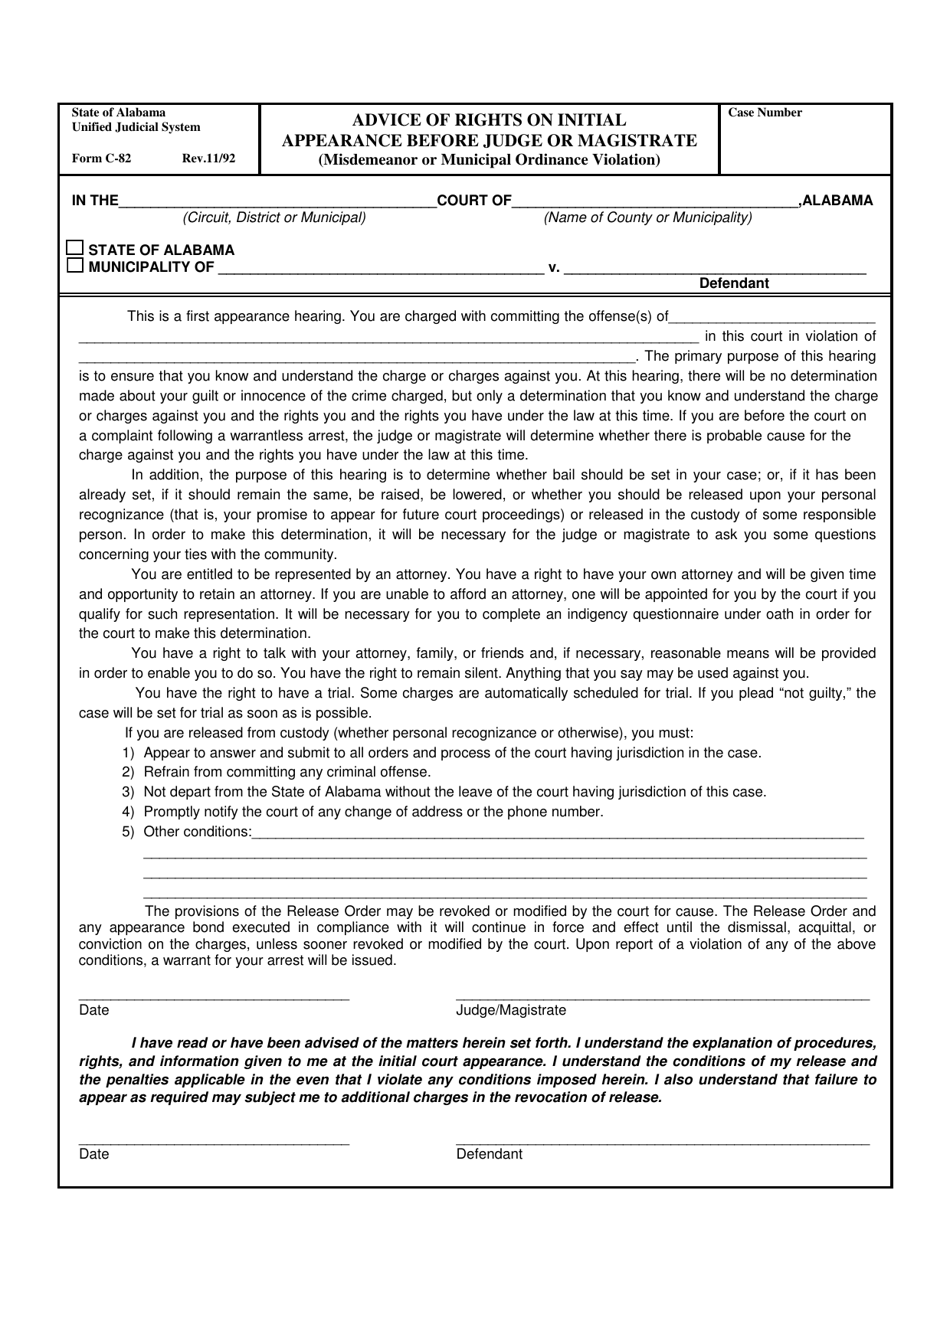 Form C-82 Advice of Rights on Initial Appearance Before Judge or Magistrate (Misdemeanor or Municipal Ordinance Violation) - Alabama, Page 1